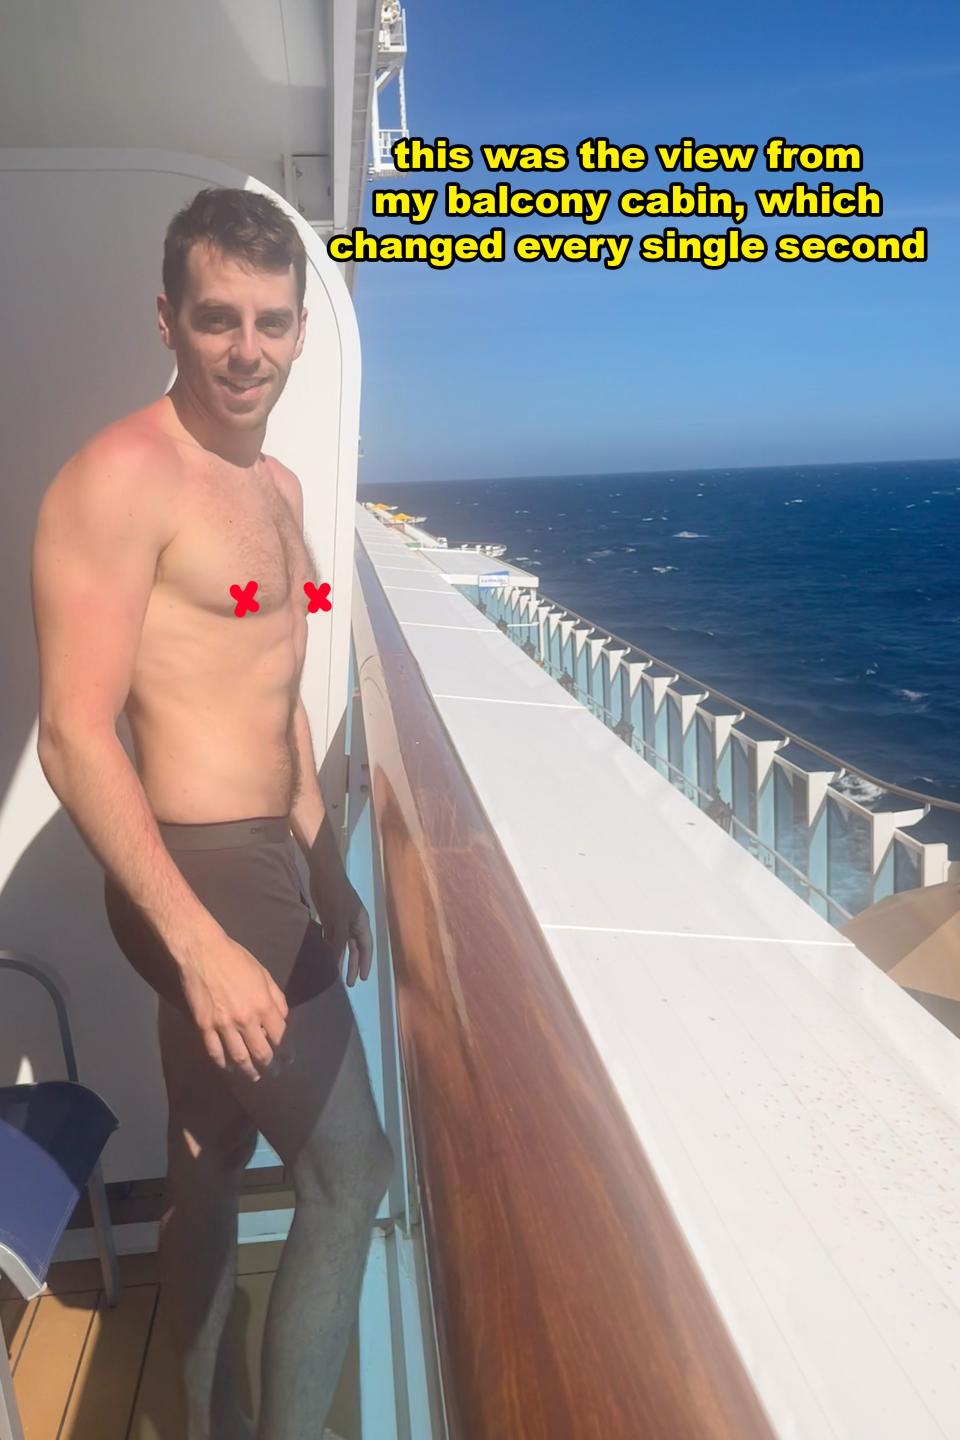 Man standing on a cruise ship balcony overlooking the ocean, text overlay about changing views